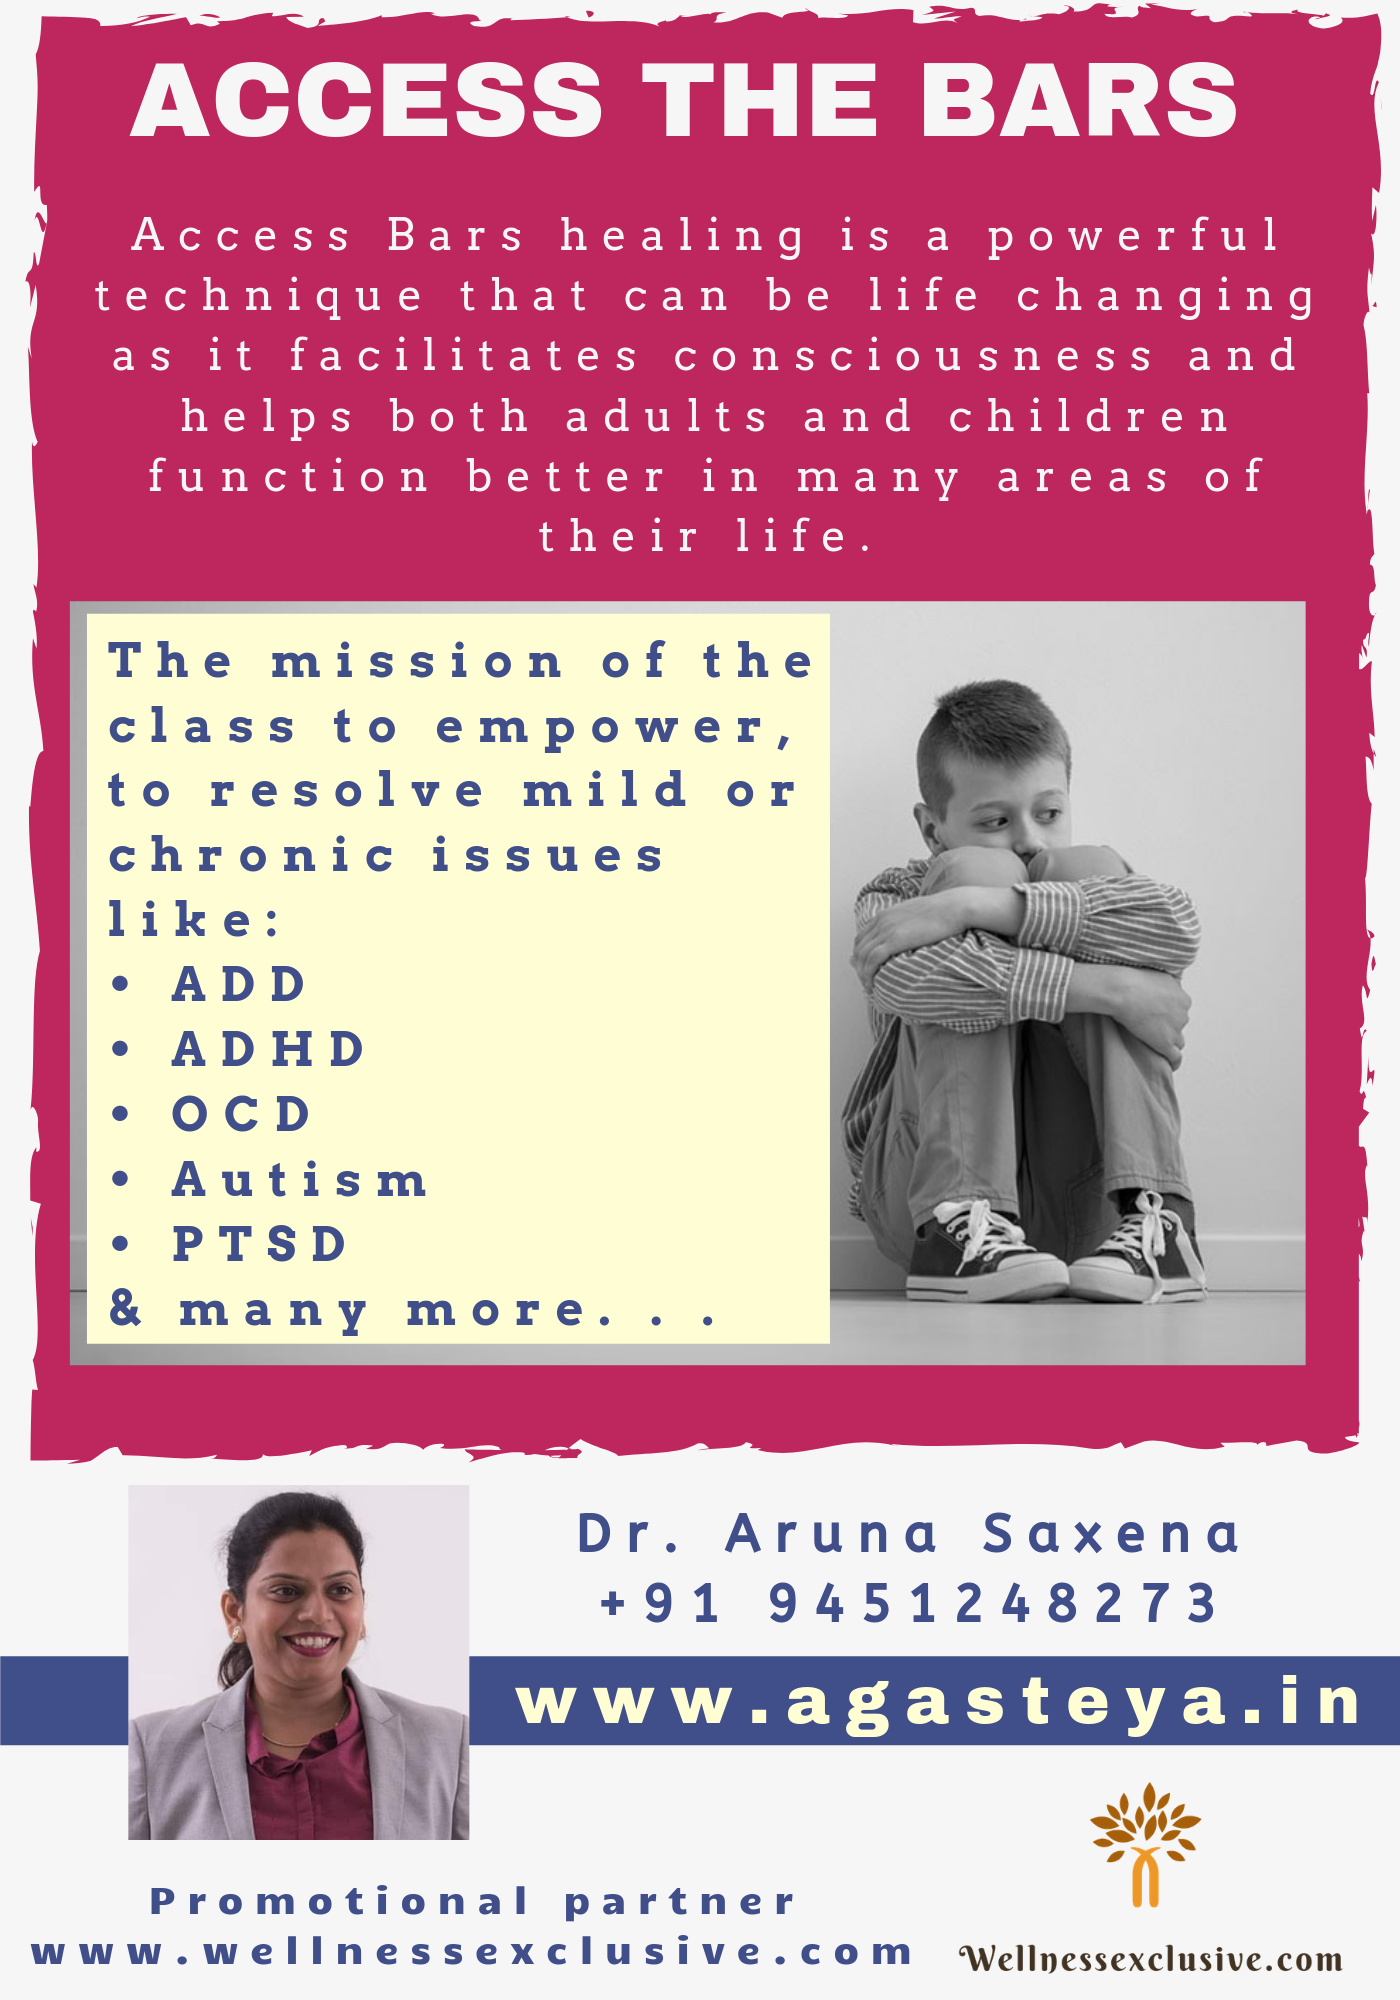 Access Bars Class for ADHD, ADD, OCD, Autism, PCD by Dr. Aruna Saxena - Surat